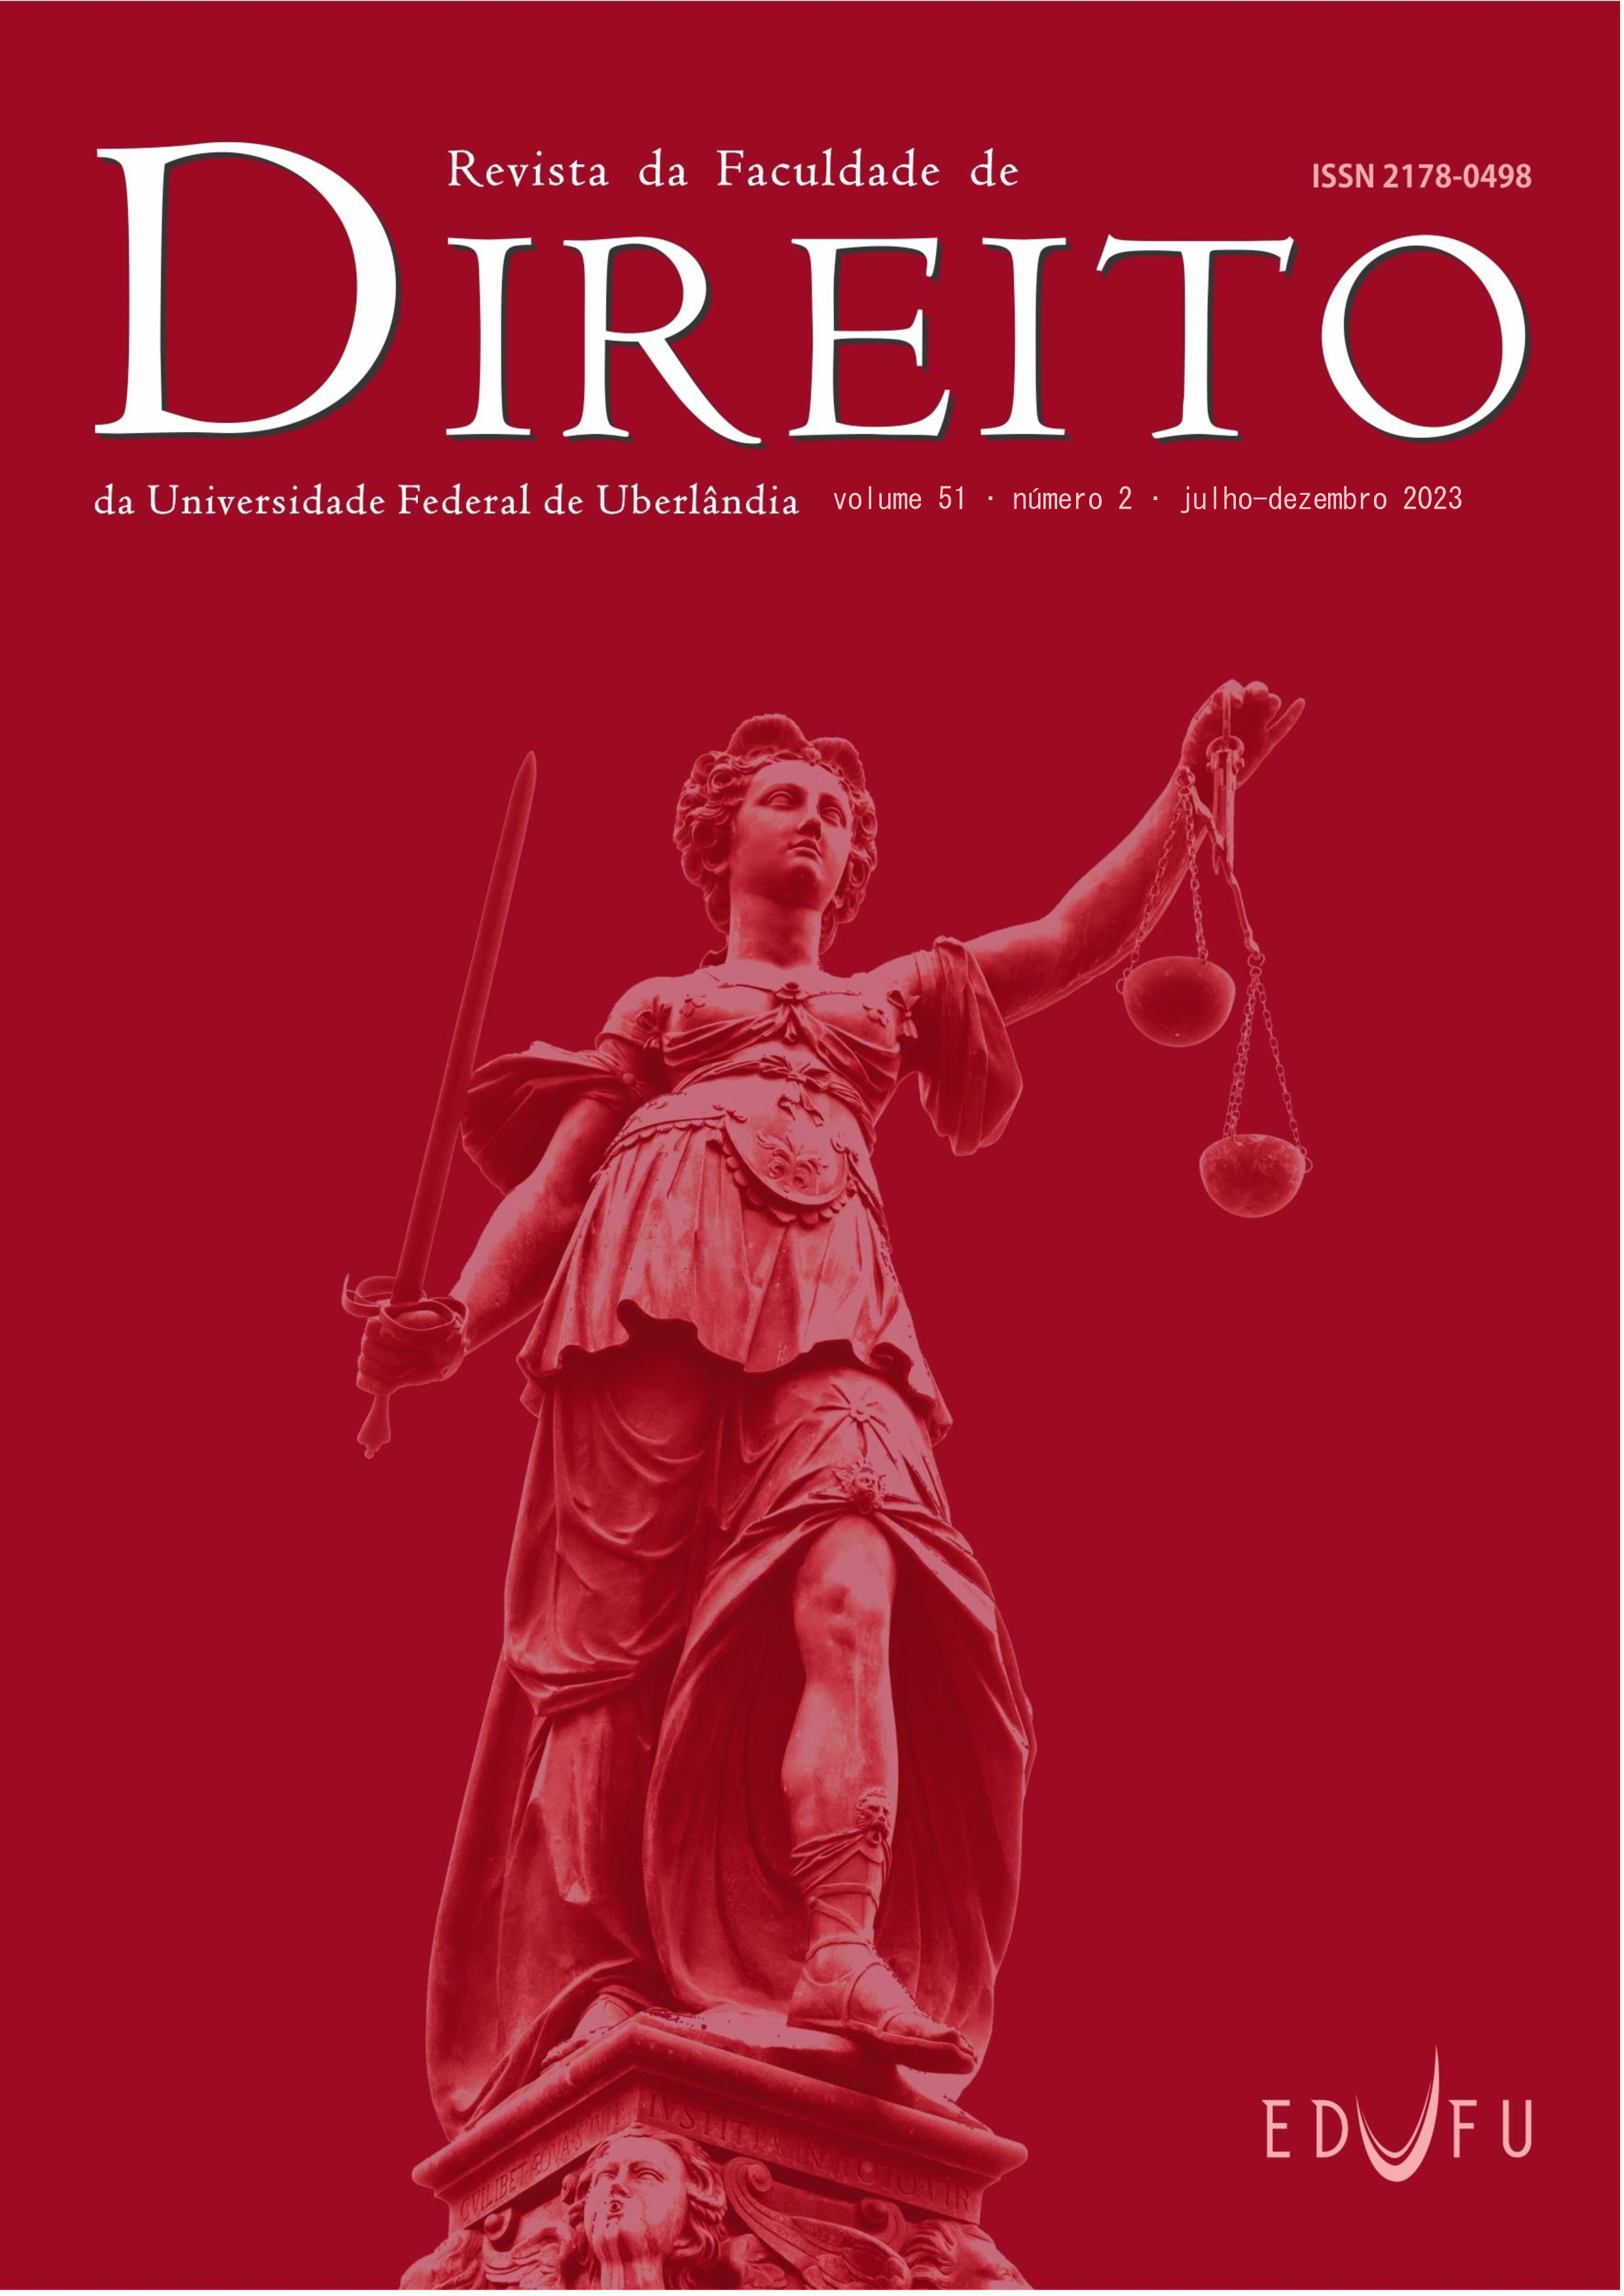 					View Vol. 51 No. 2 (2023): Journal of the Faculty of Law of the Federal University of Uberlândia
				